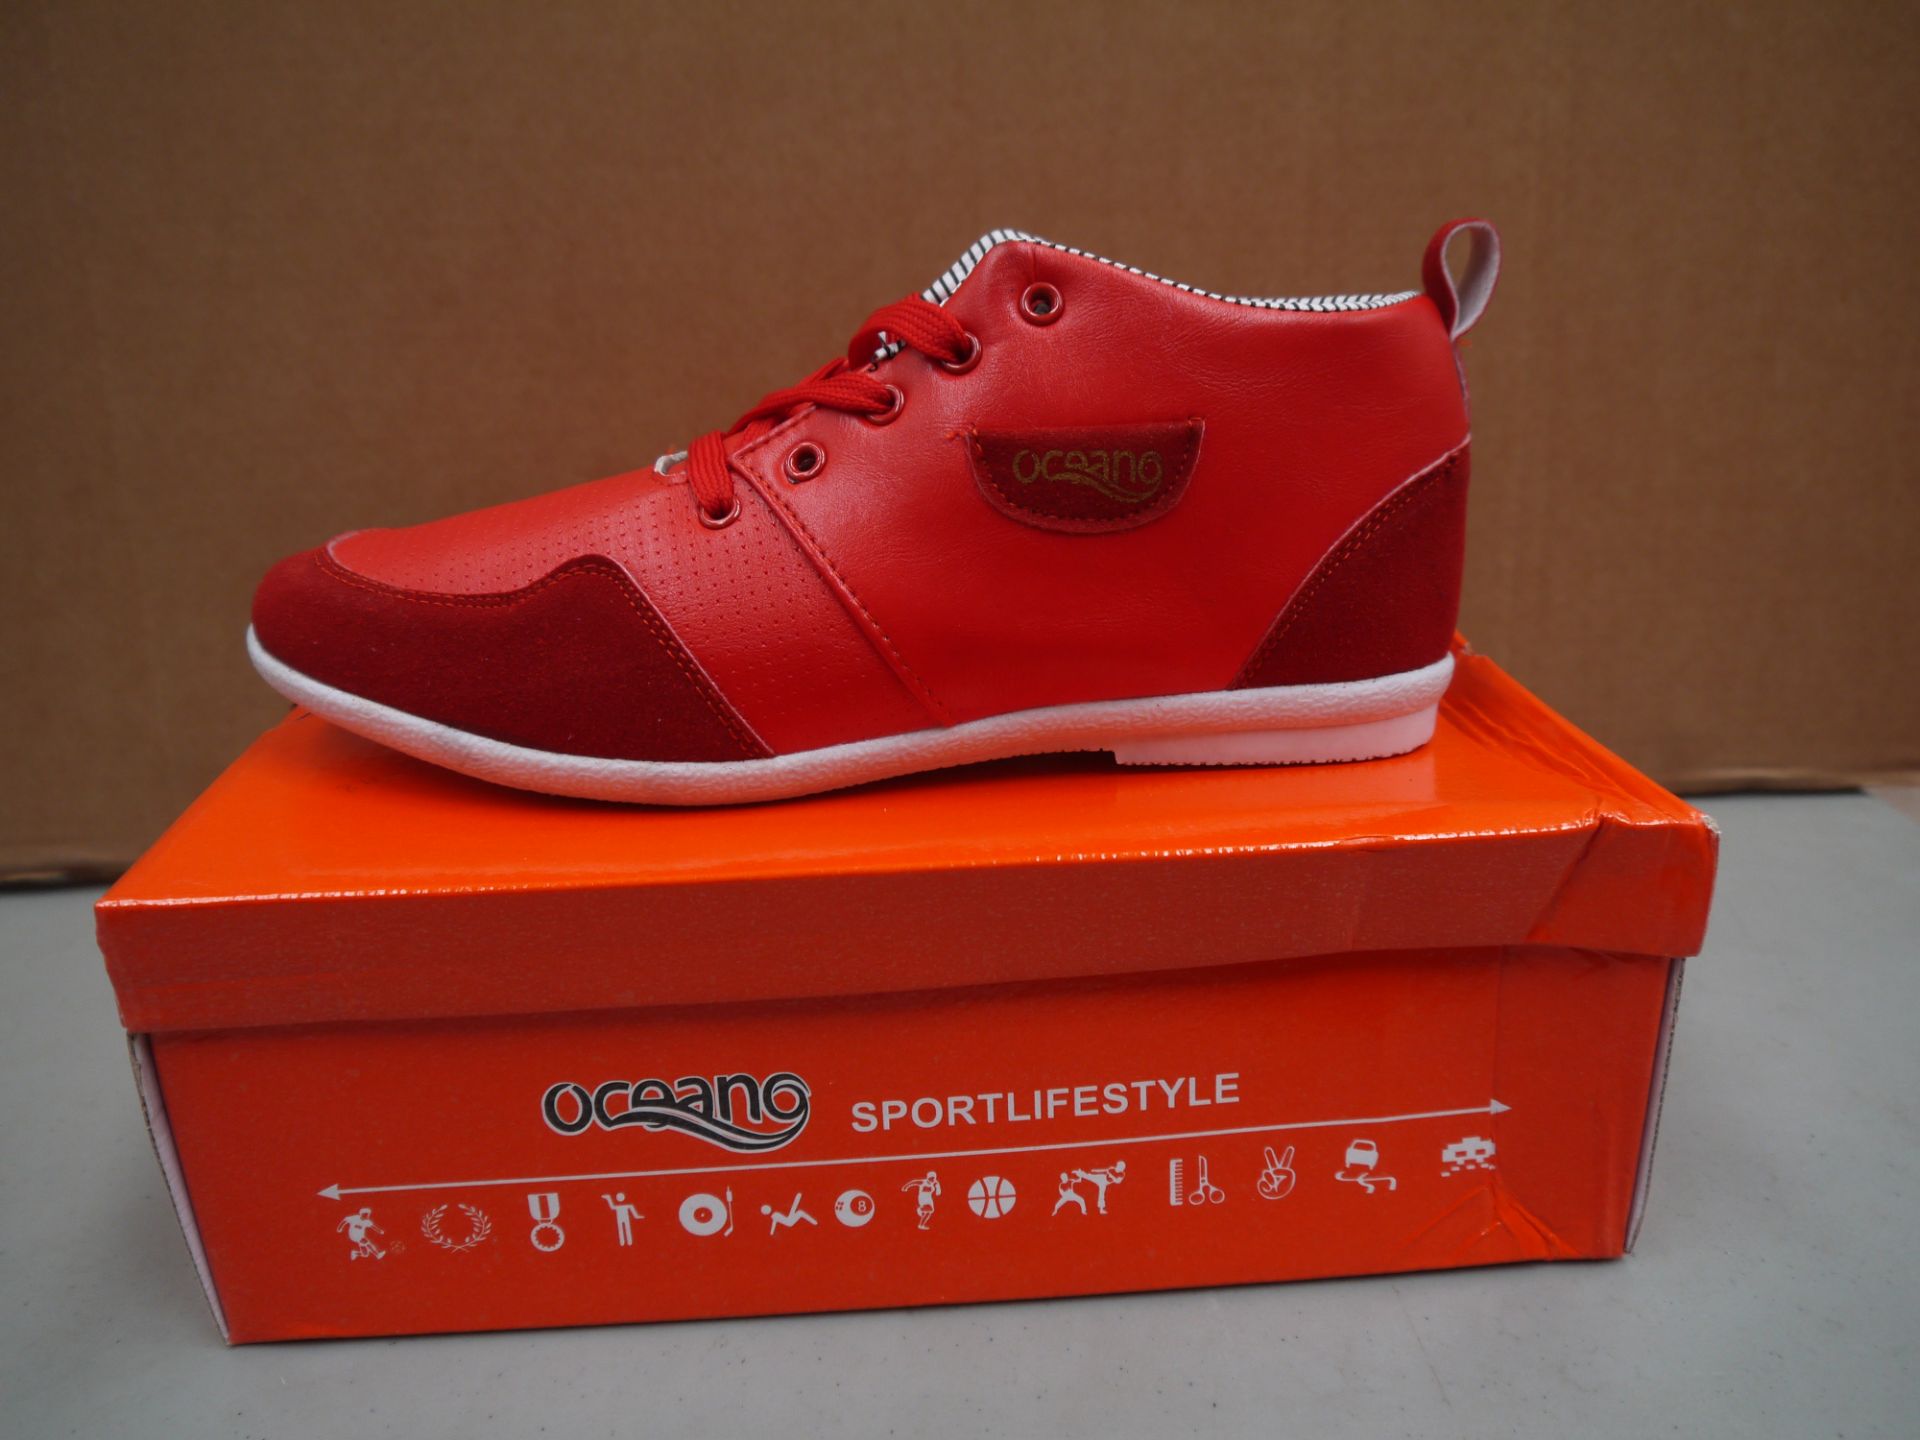 Mens Red Suede and leather Oceano trainer style boot new and boxed size UK11